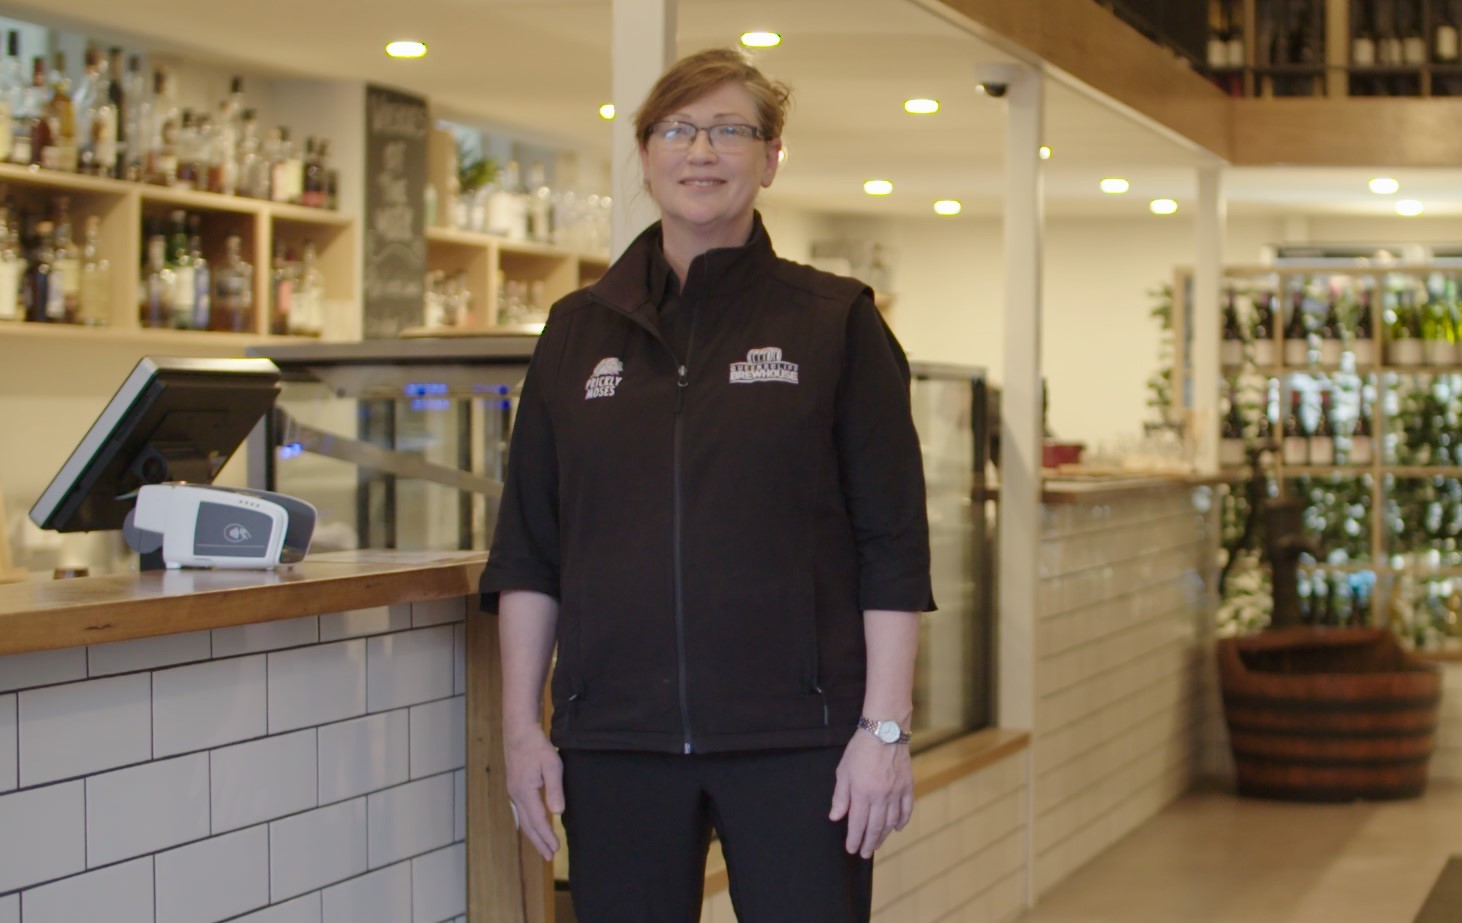 Deb smiling standing in a restaurant in front of serving area wearing black